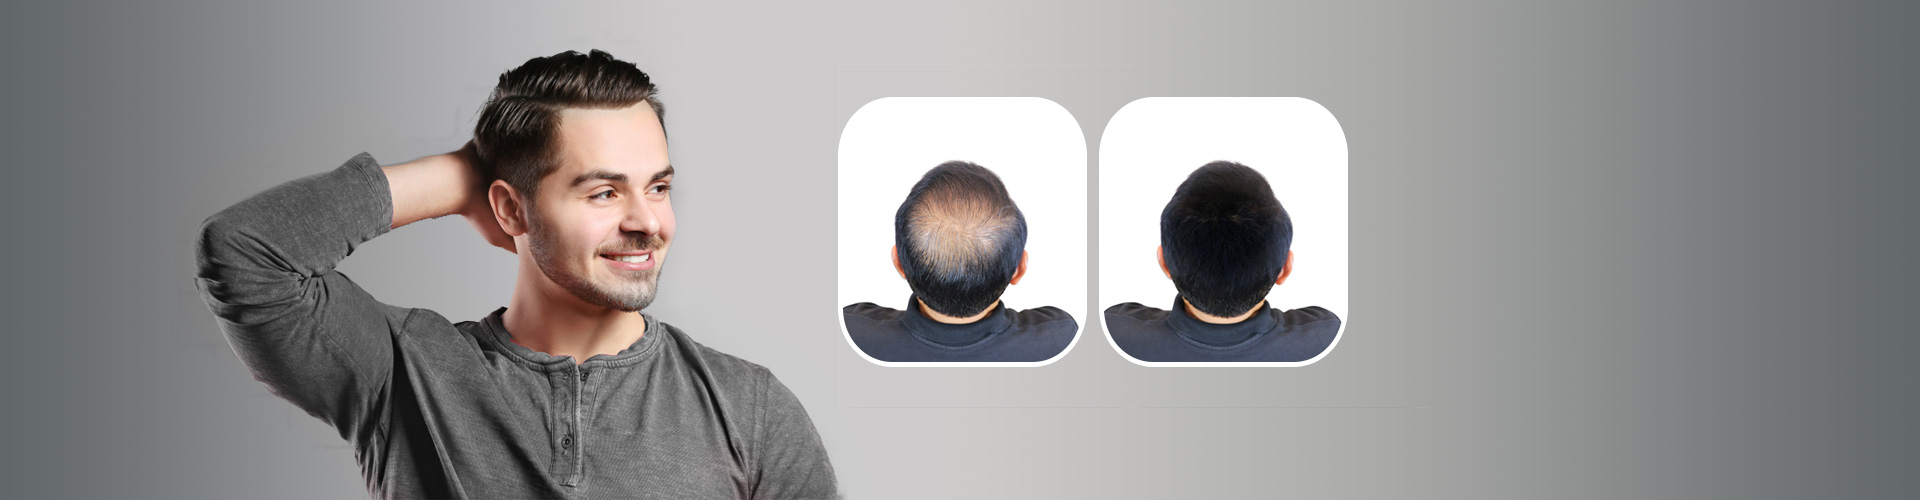 Hair Transplant Clinic in Ncr